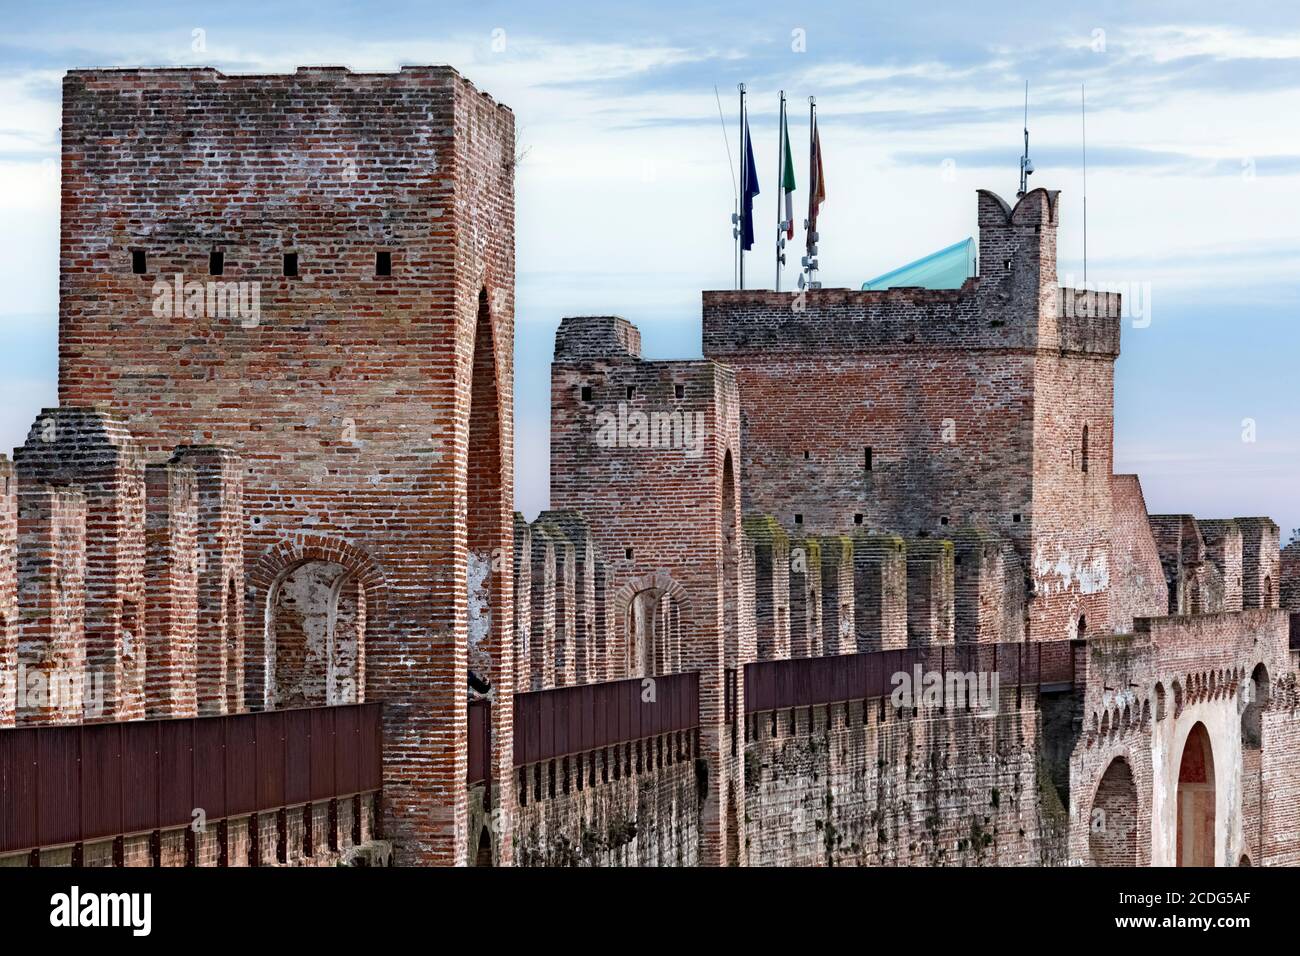 Medieval towers and walls of the town of Cittadella. Padova province, Veneto, Italy, Europe. Stock Photo